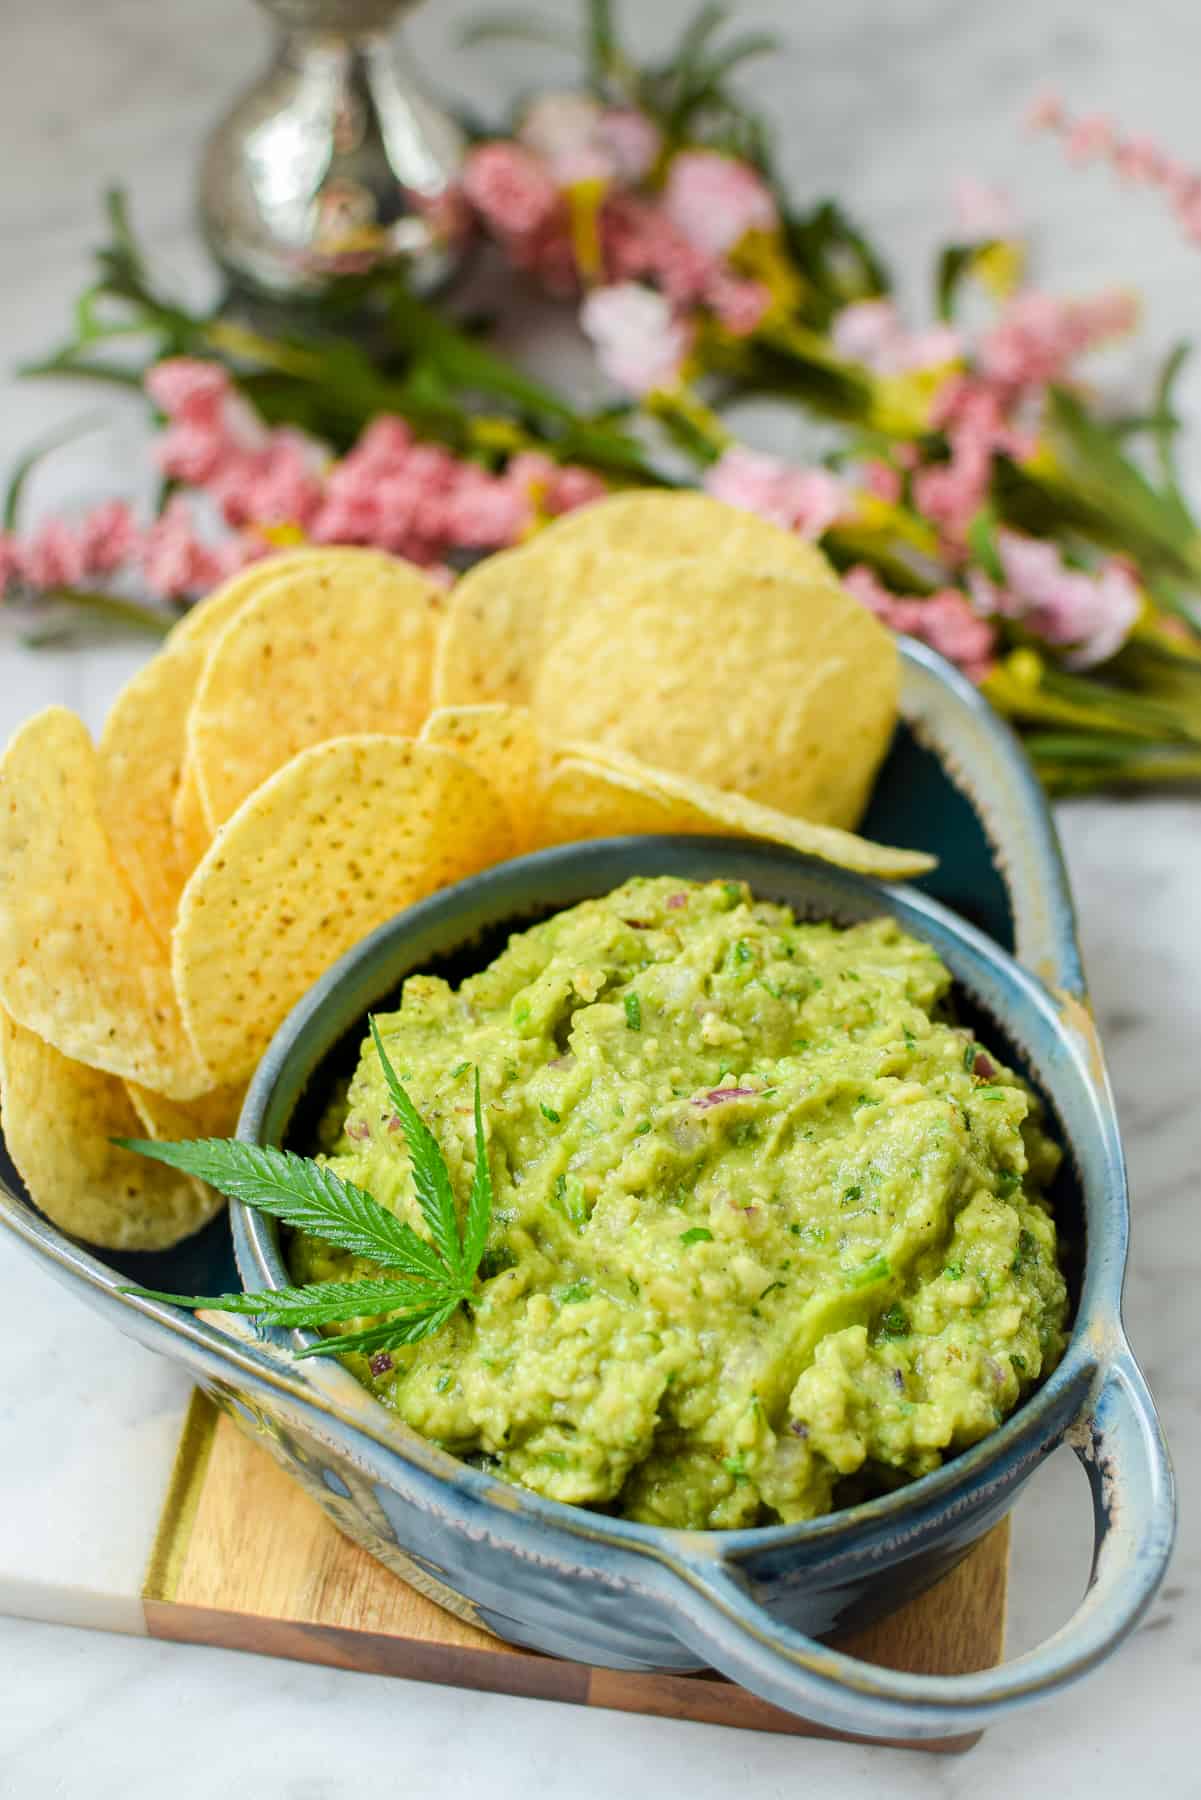 A blue bowl filled with guacamole garnished with a cannabis leaf paired with round tortilla chips